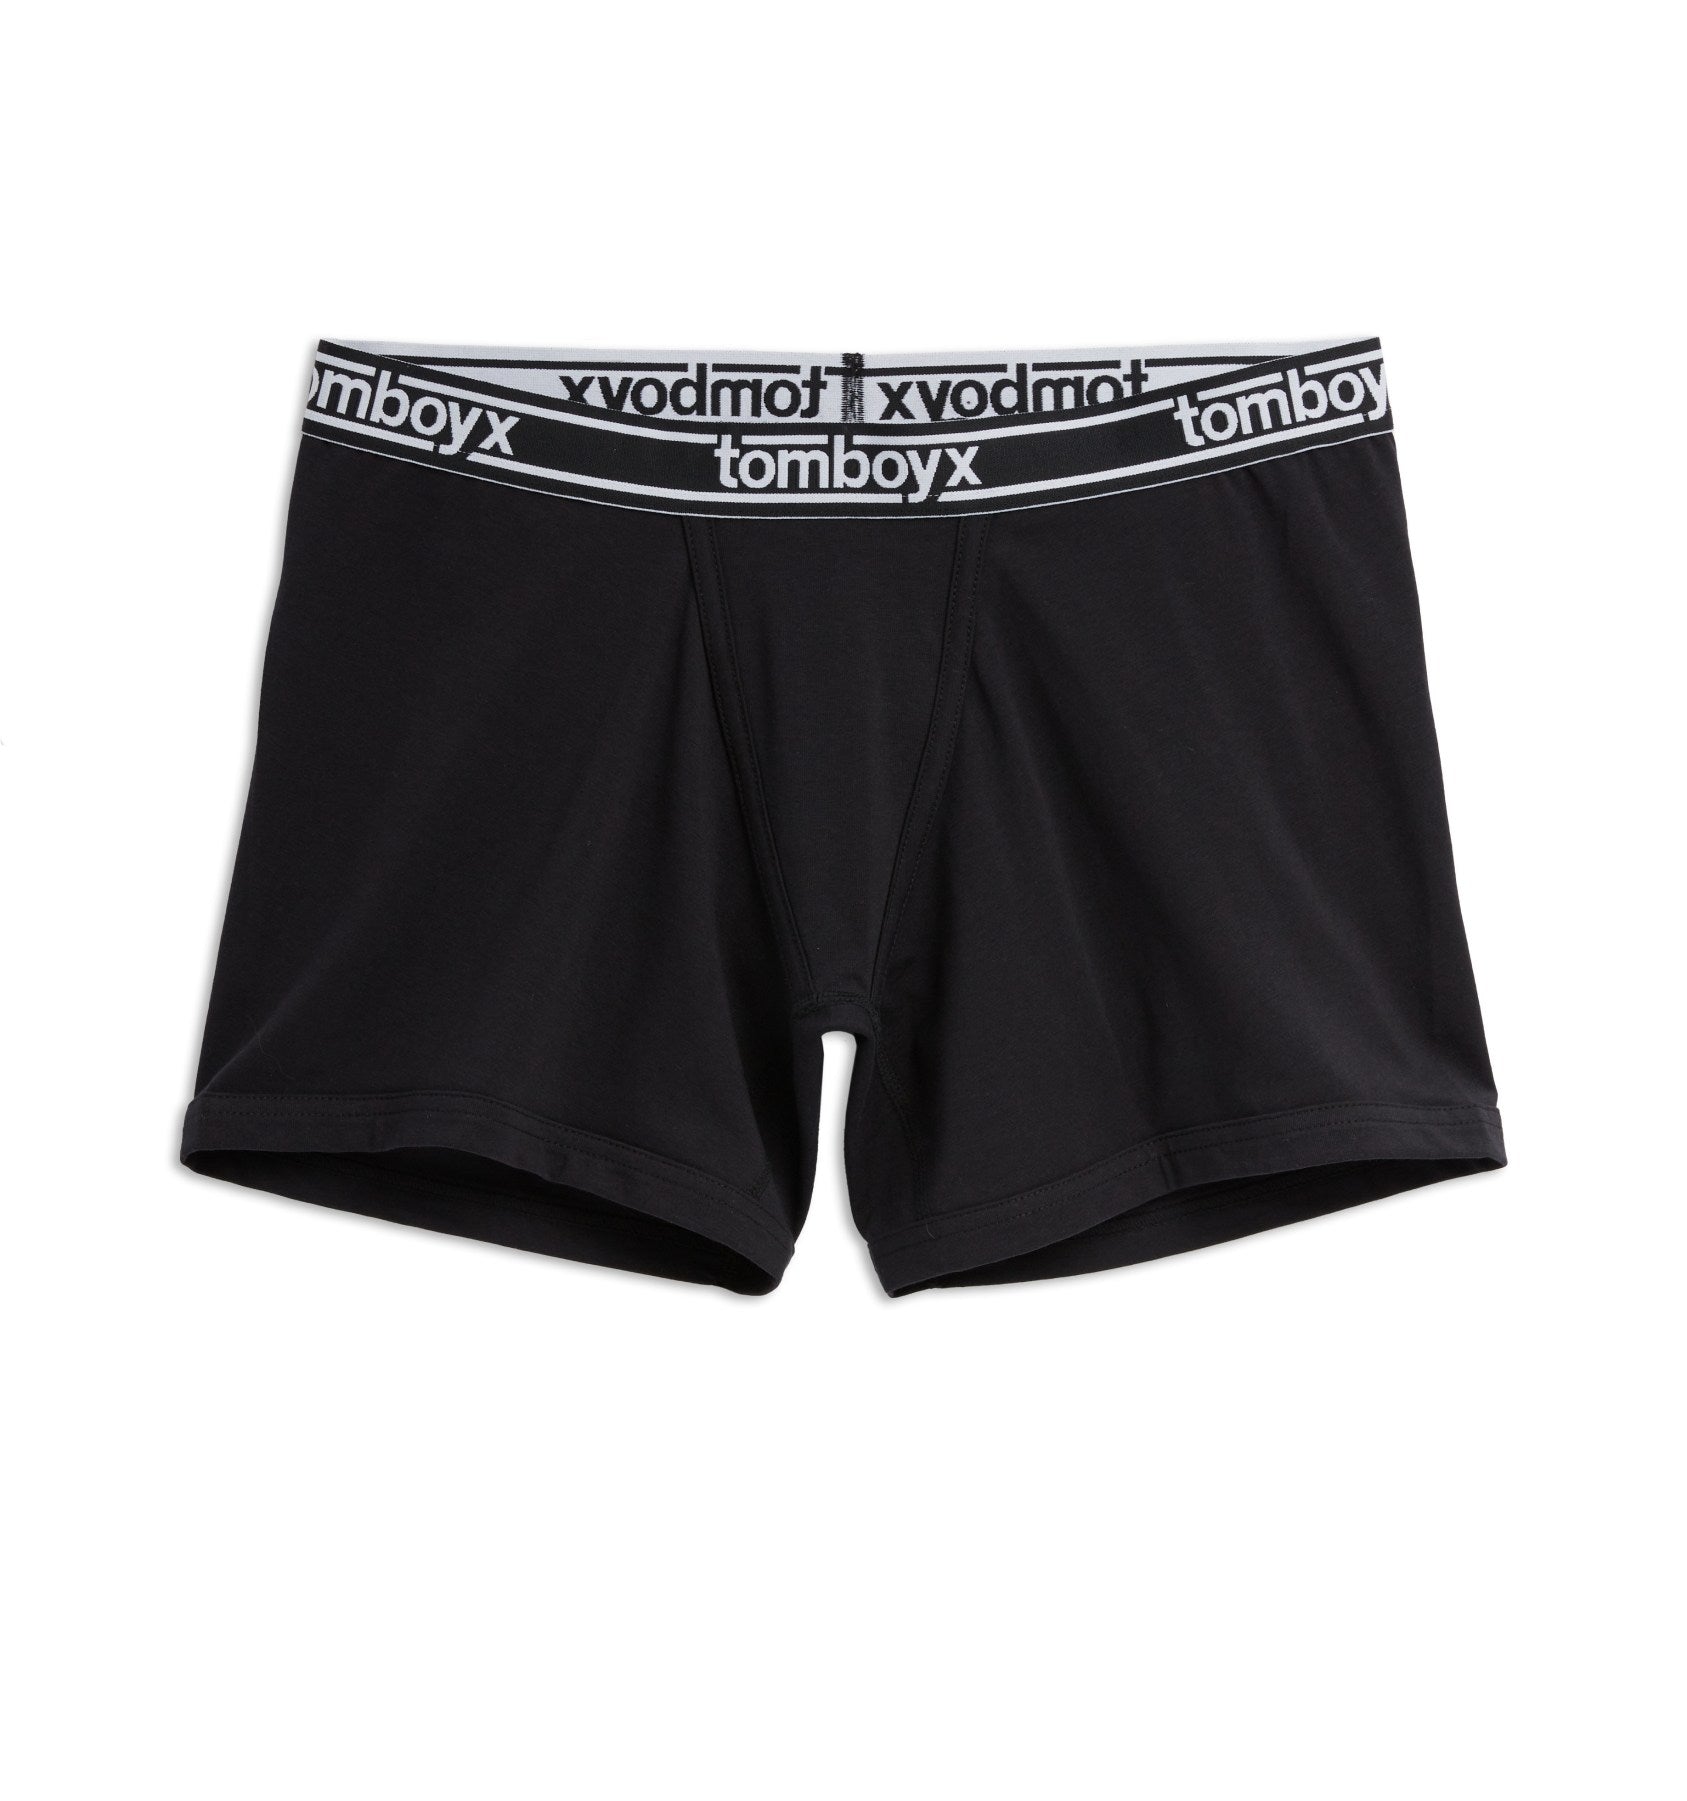 Pride Black All-in-One Packing Boxers